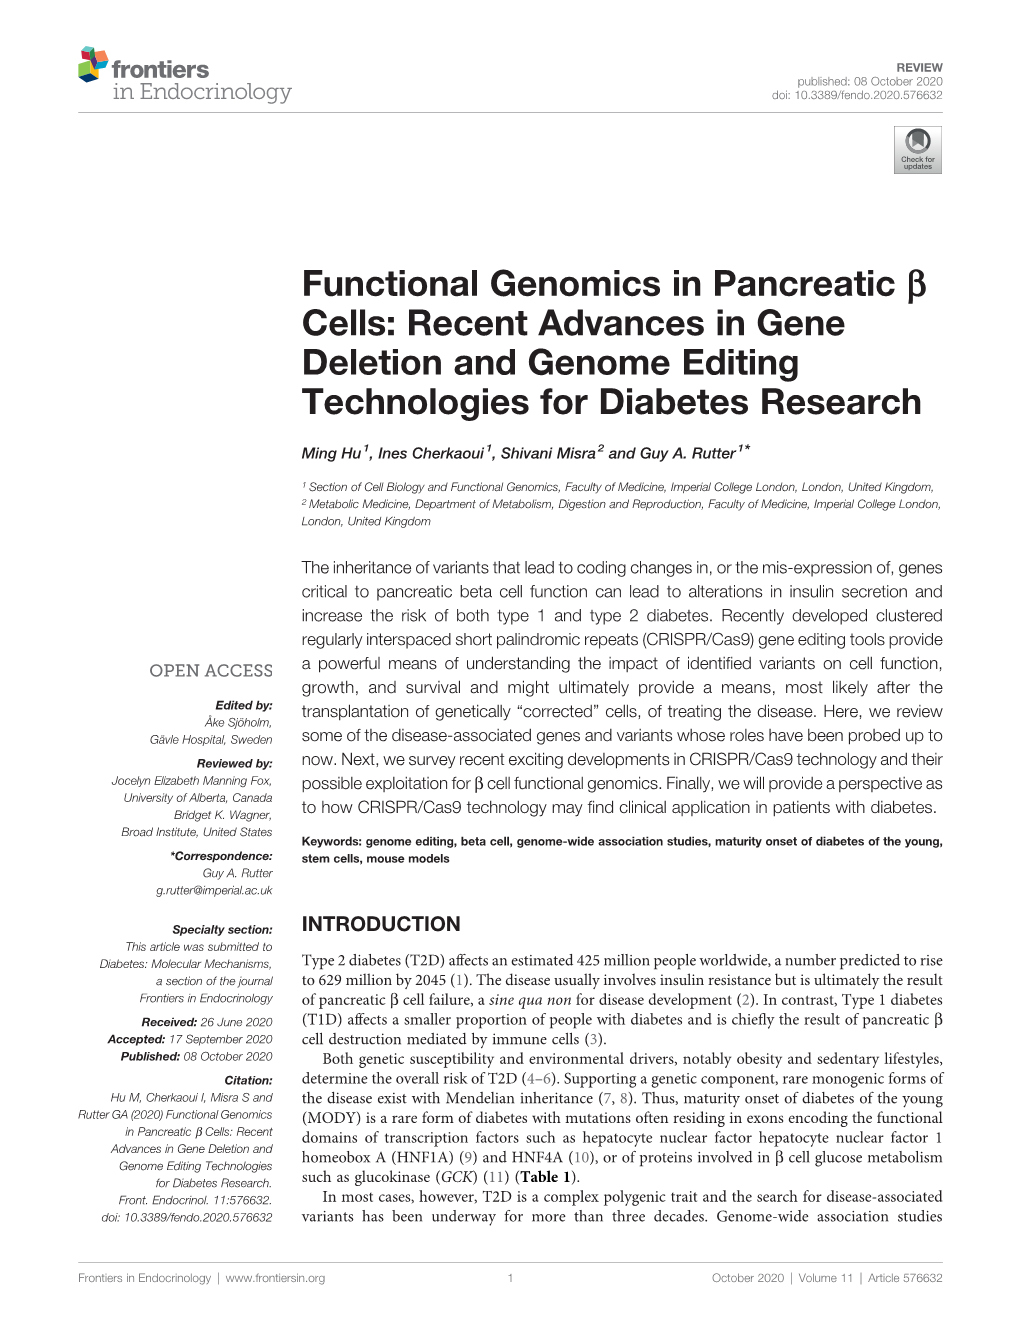 Recent Advances in Gene Deletion and Genome Editing Technologies for Diabetes Research